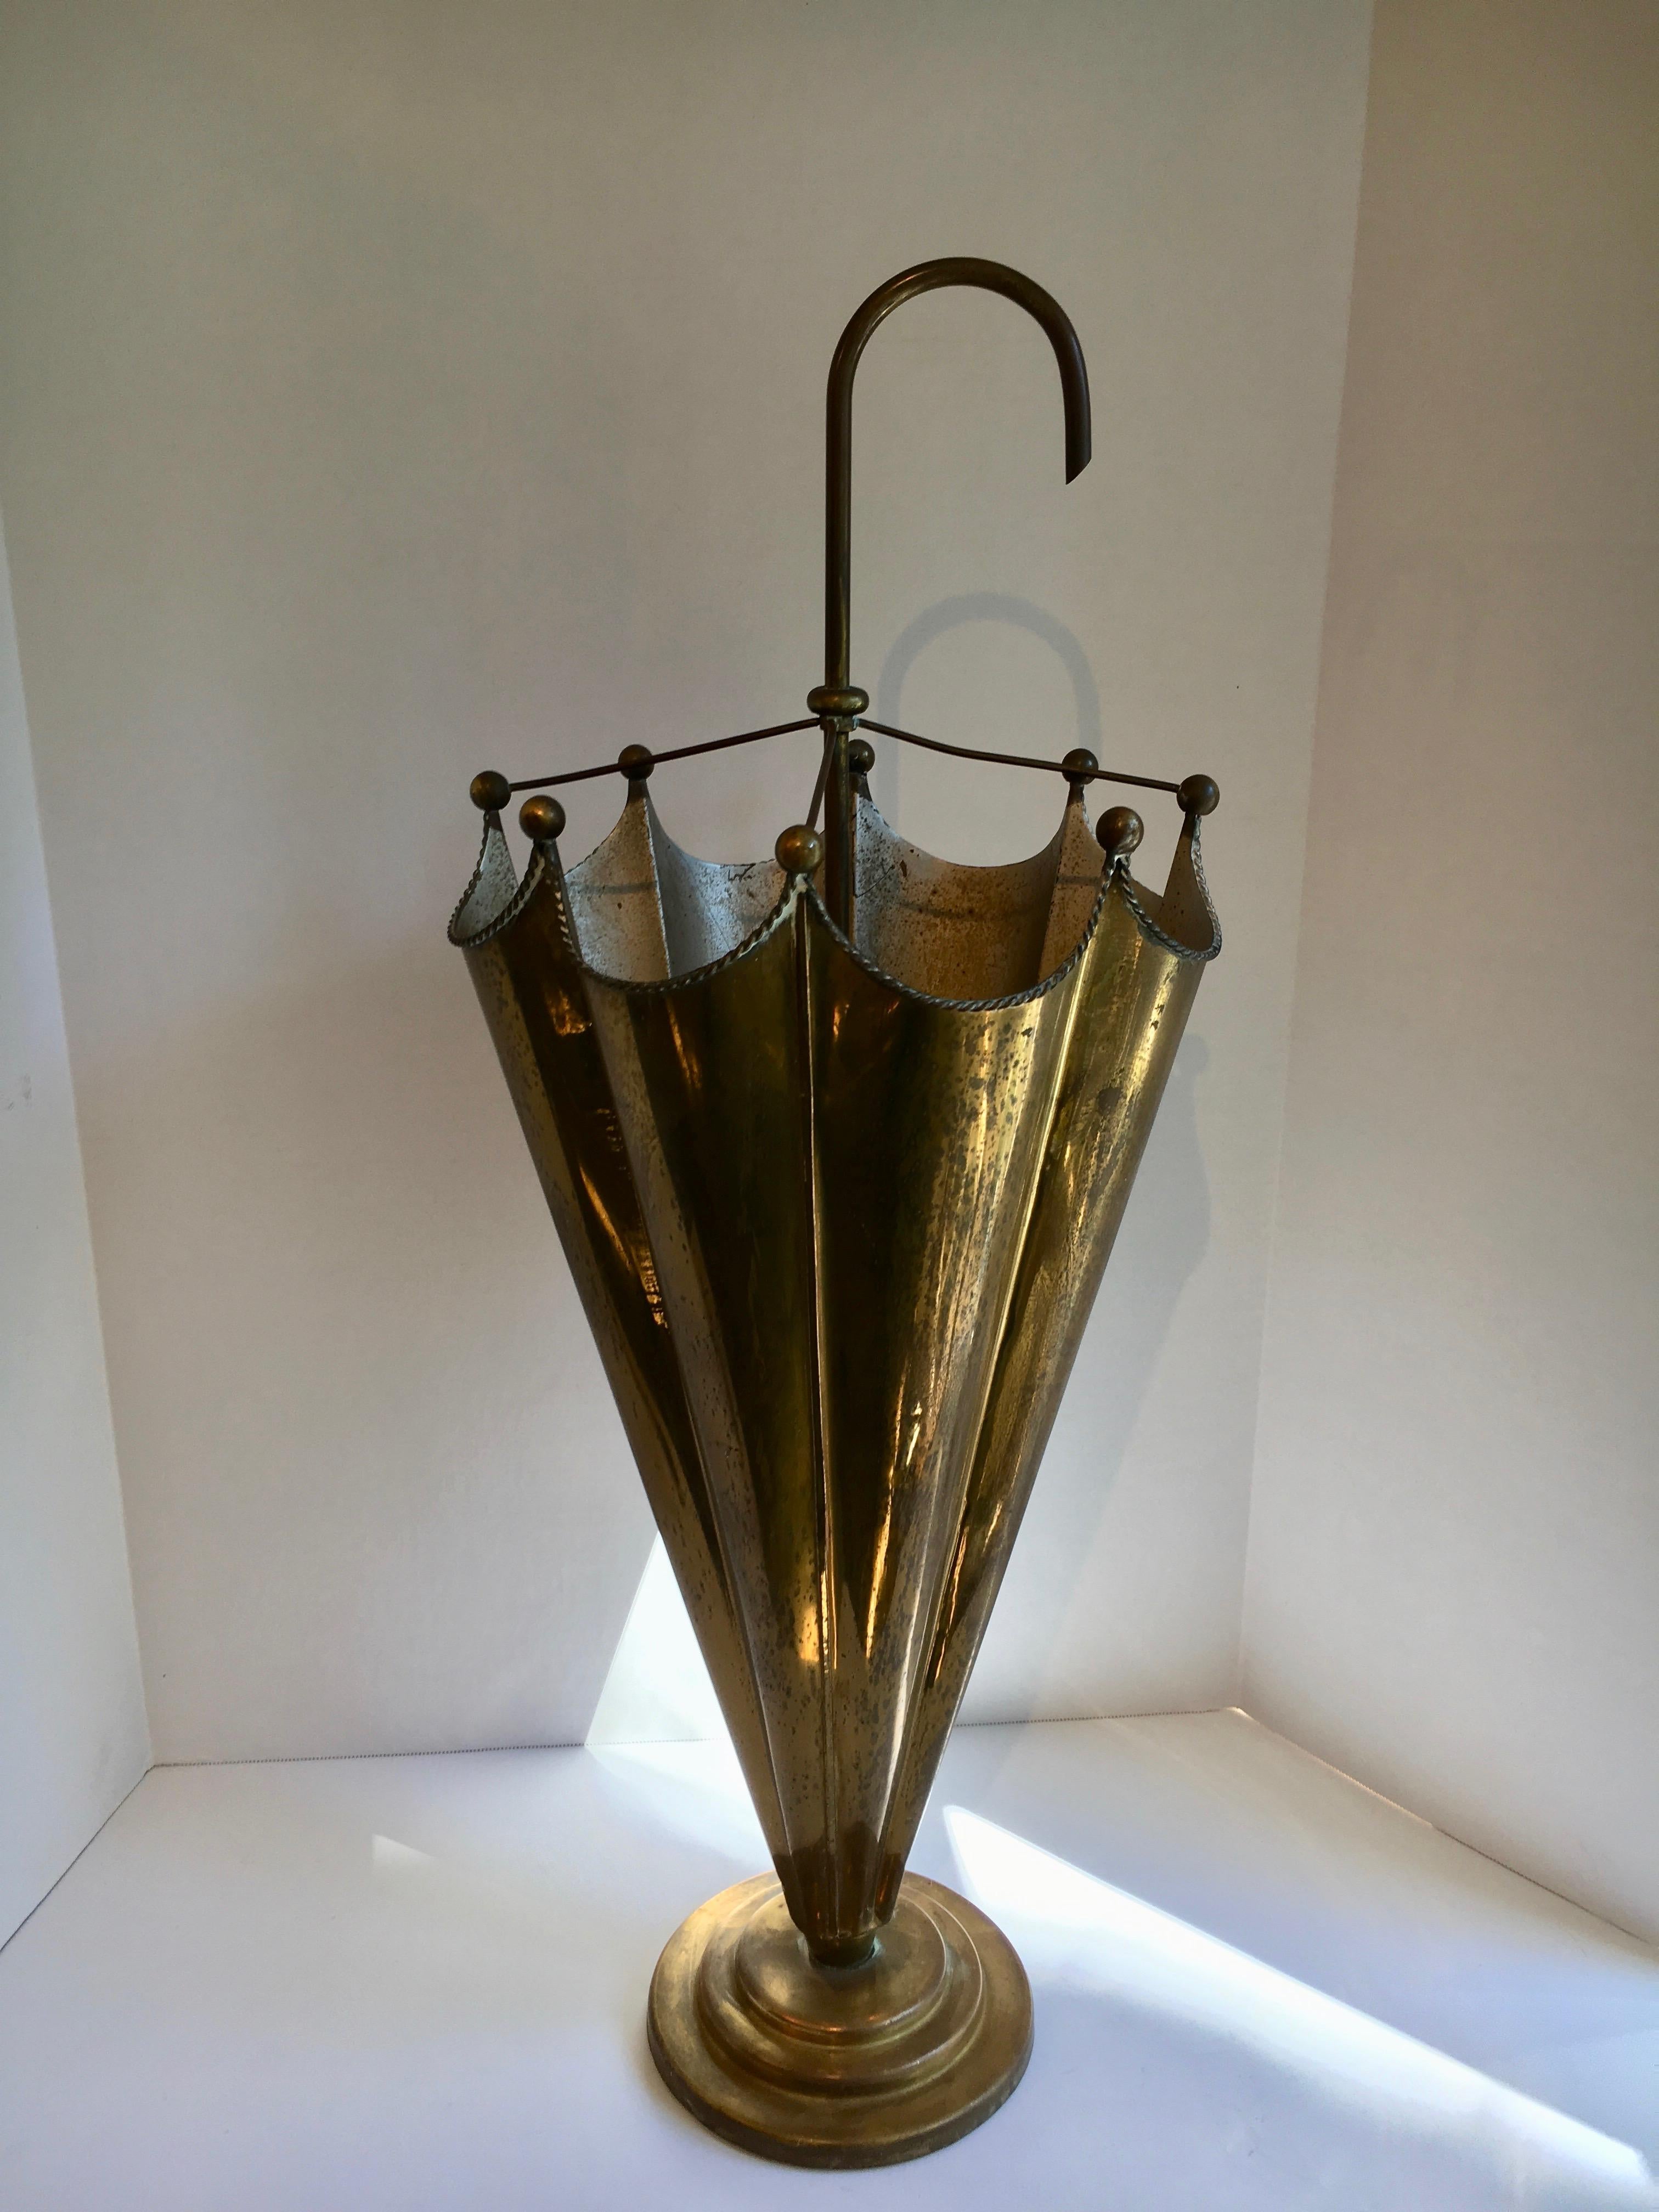 Vintage French brass umbrella stand, in the shape of an umbrella, this stand is quite handsome, with very nice detailing and extremely functional.